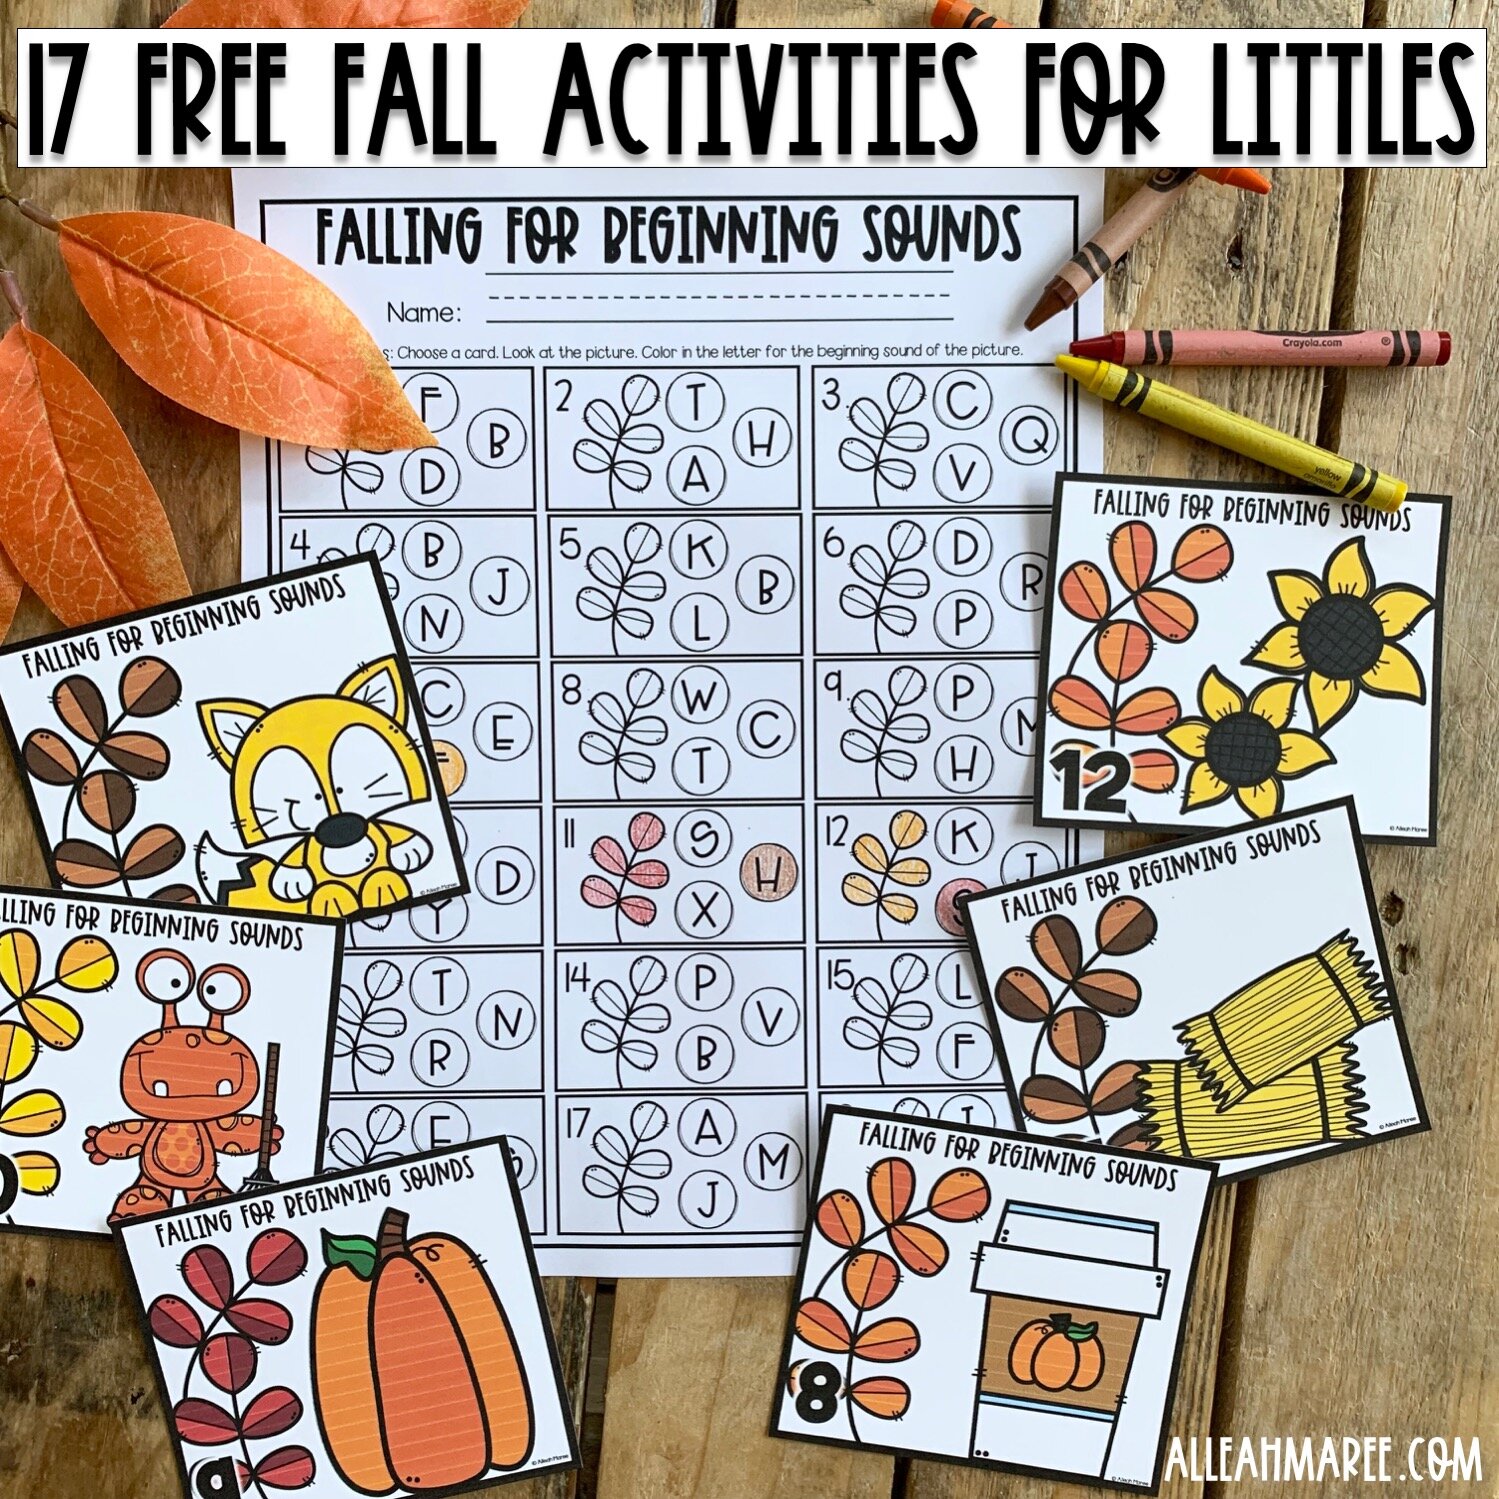 100+ Engaging and Playful Fall Activities for Preschoolers - Fun-A-Day!